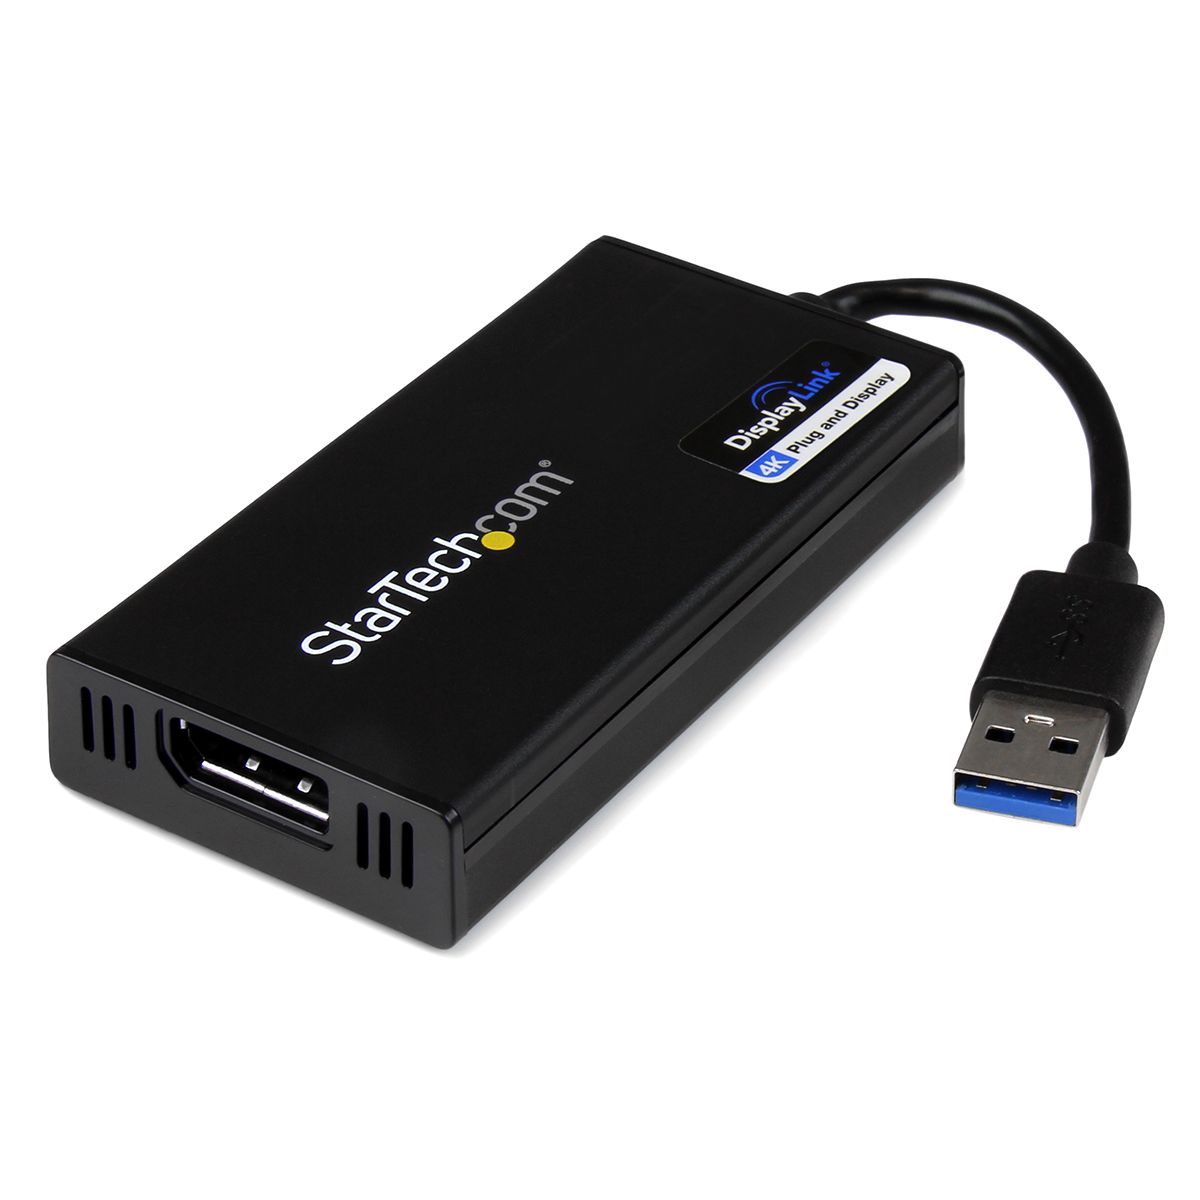 StarTech.com USB A to DisplayPort Adapter, USB 3.0, 1 Supported Display(s)  - up to 4K